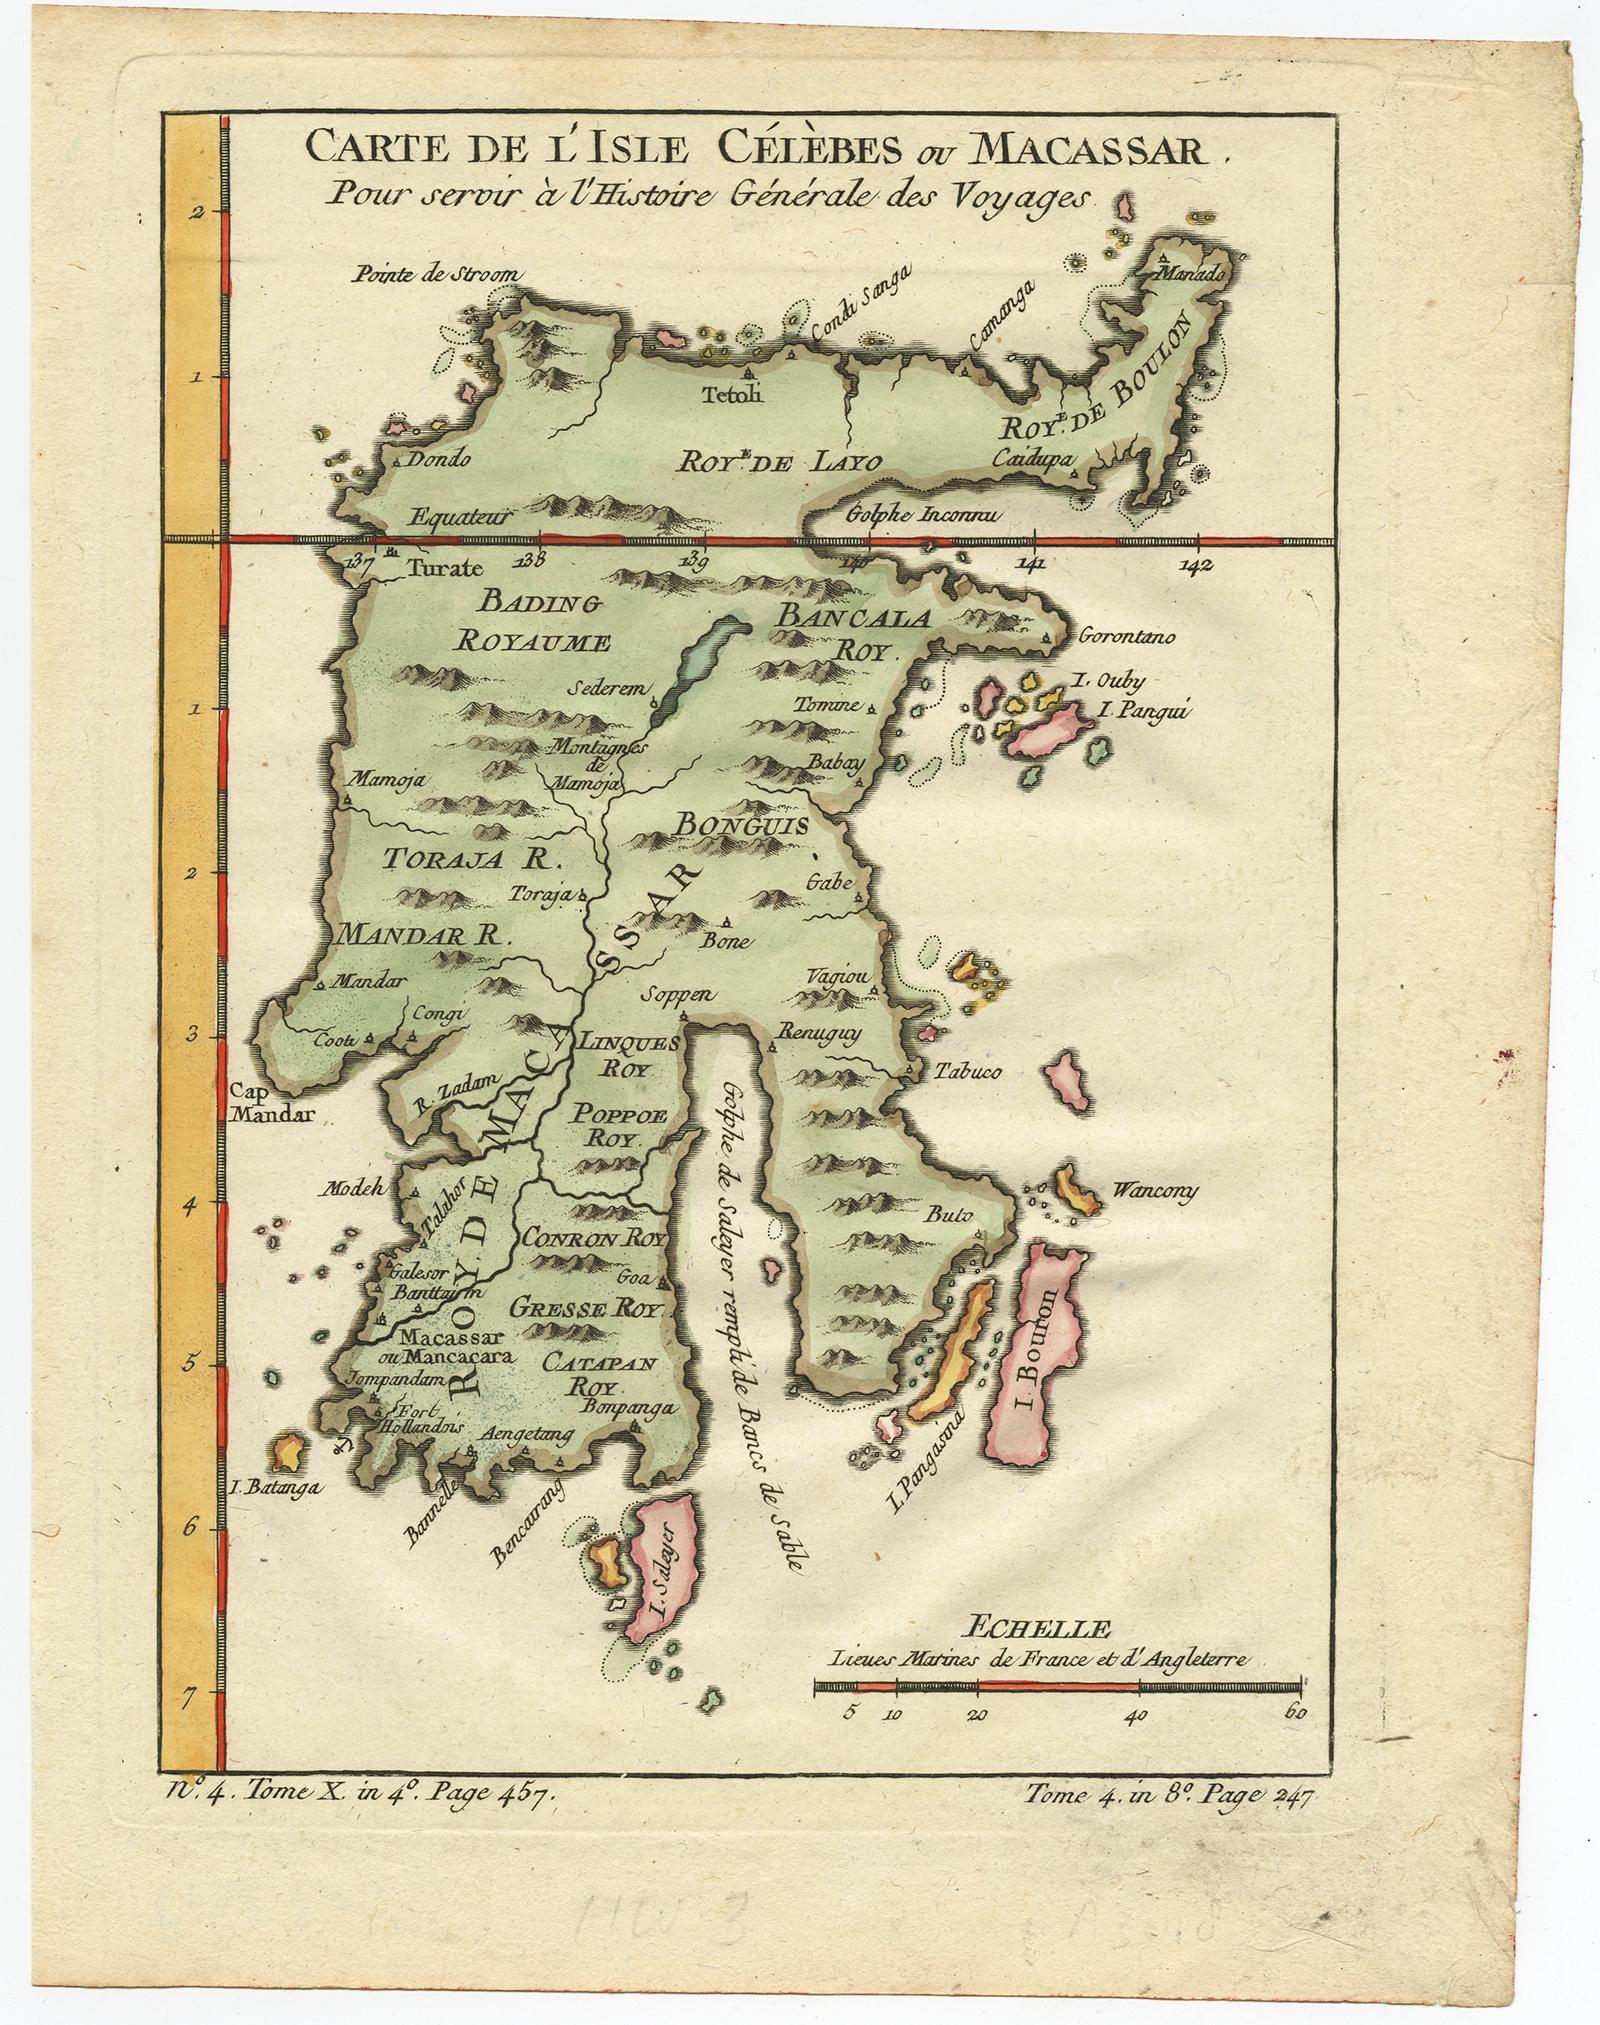 Antique map titled 'Carte De L'Isle Celebes ou Macassar'. Detailed copper engraved map of Celebes (Sulawesi, Indonesia), showing Makassar, which was the most important trading city of eastern Indonesia in the sixteenth century. Makassar traded in